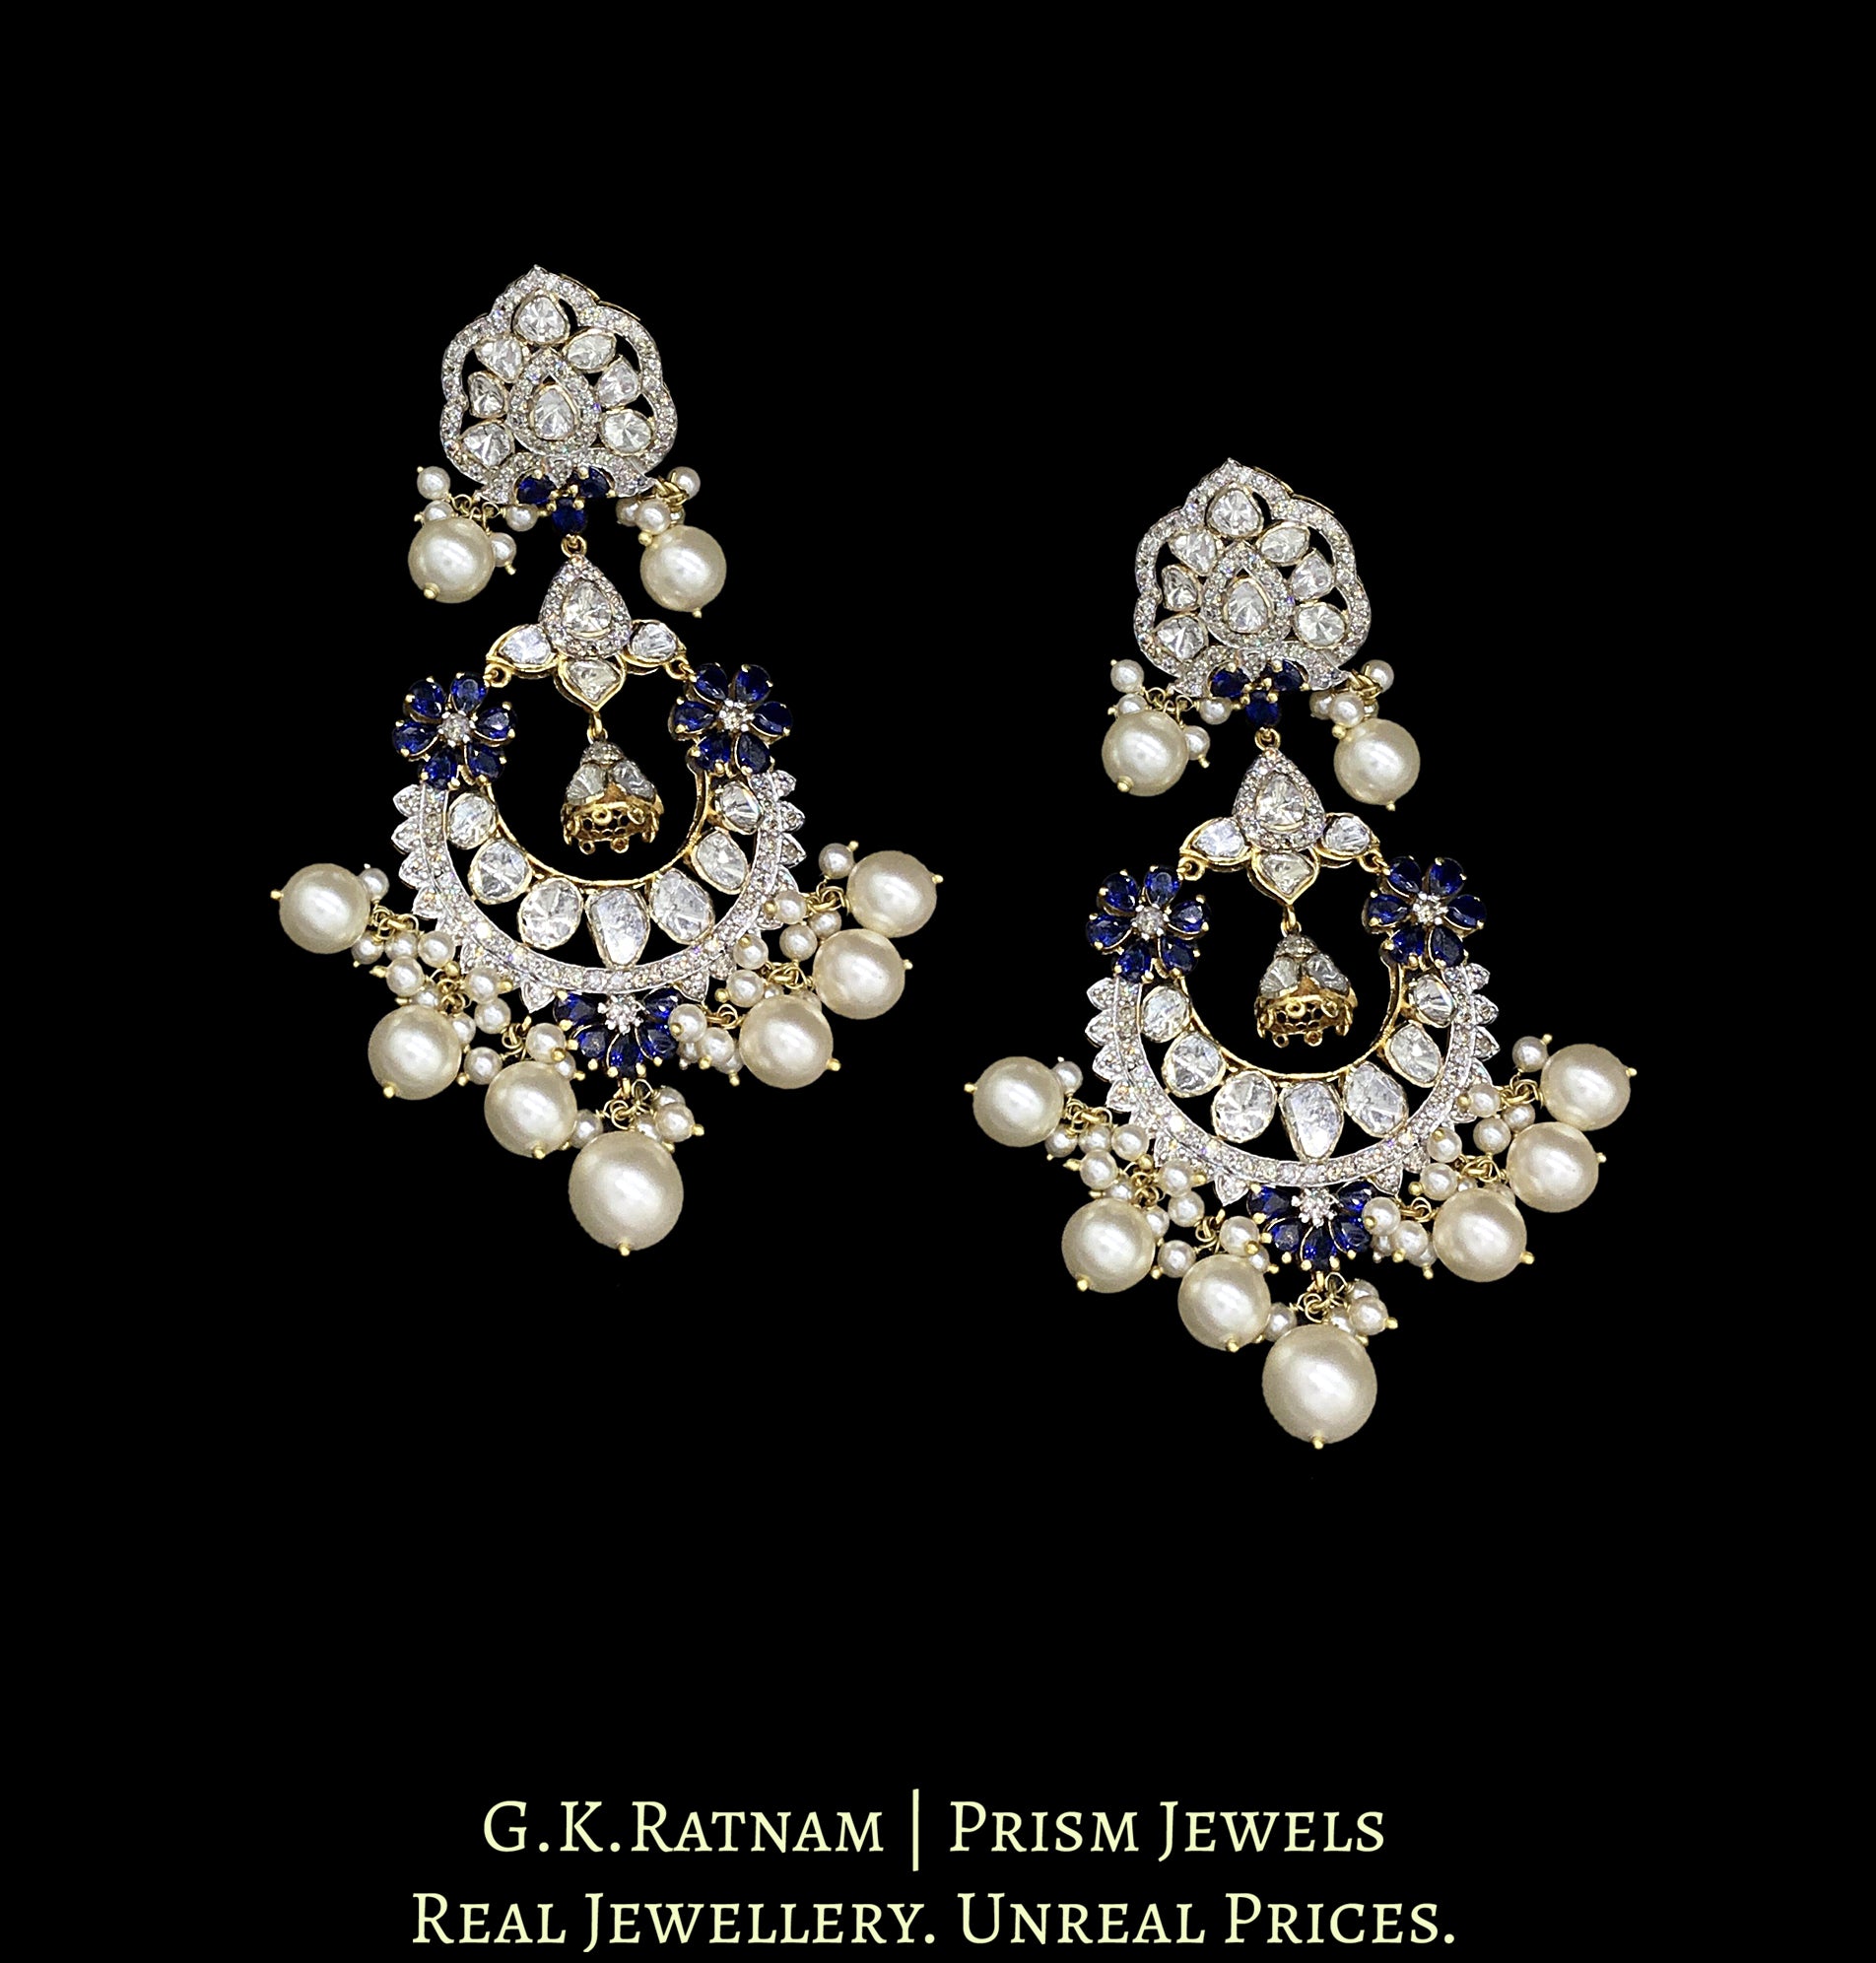 14k Gold and Diamond Polki Open Setting Chand Bali Earring Pair with hyderabadi pearls